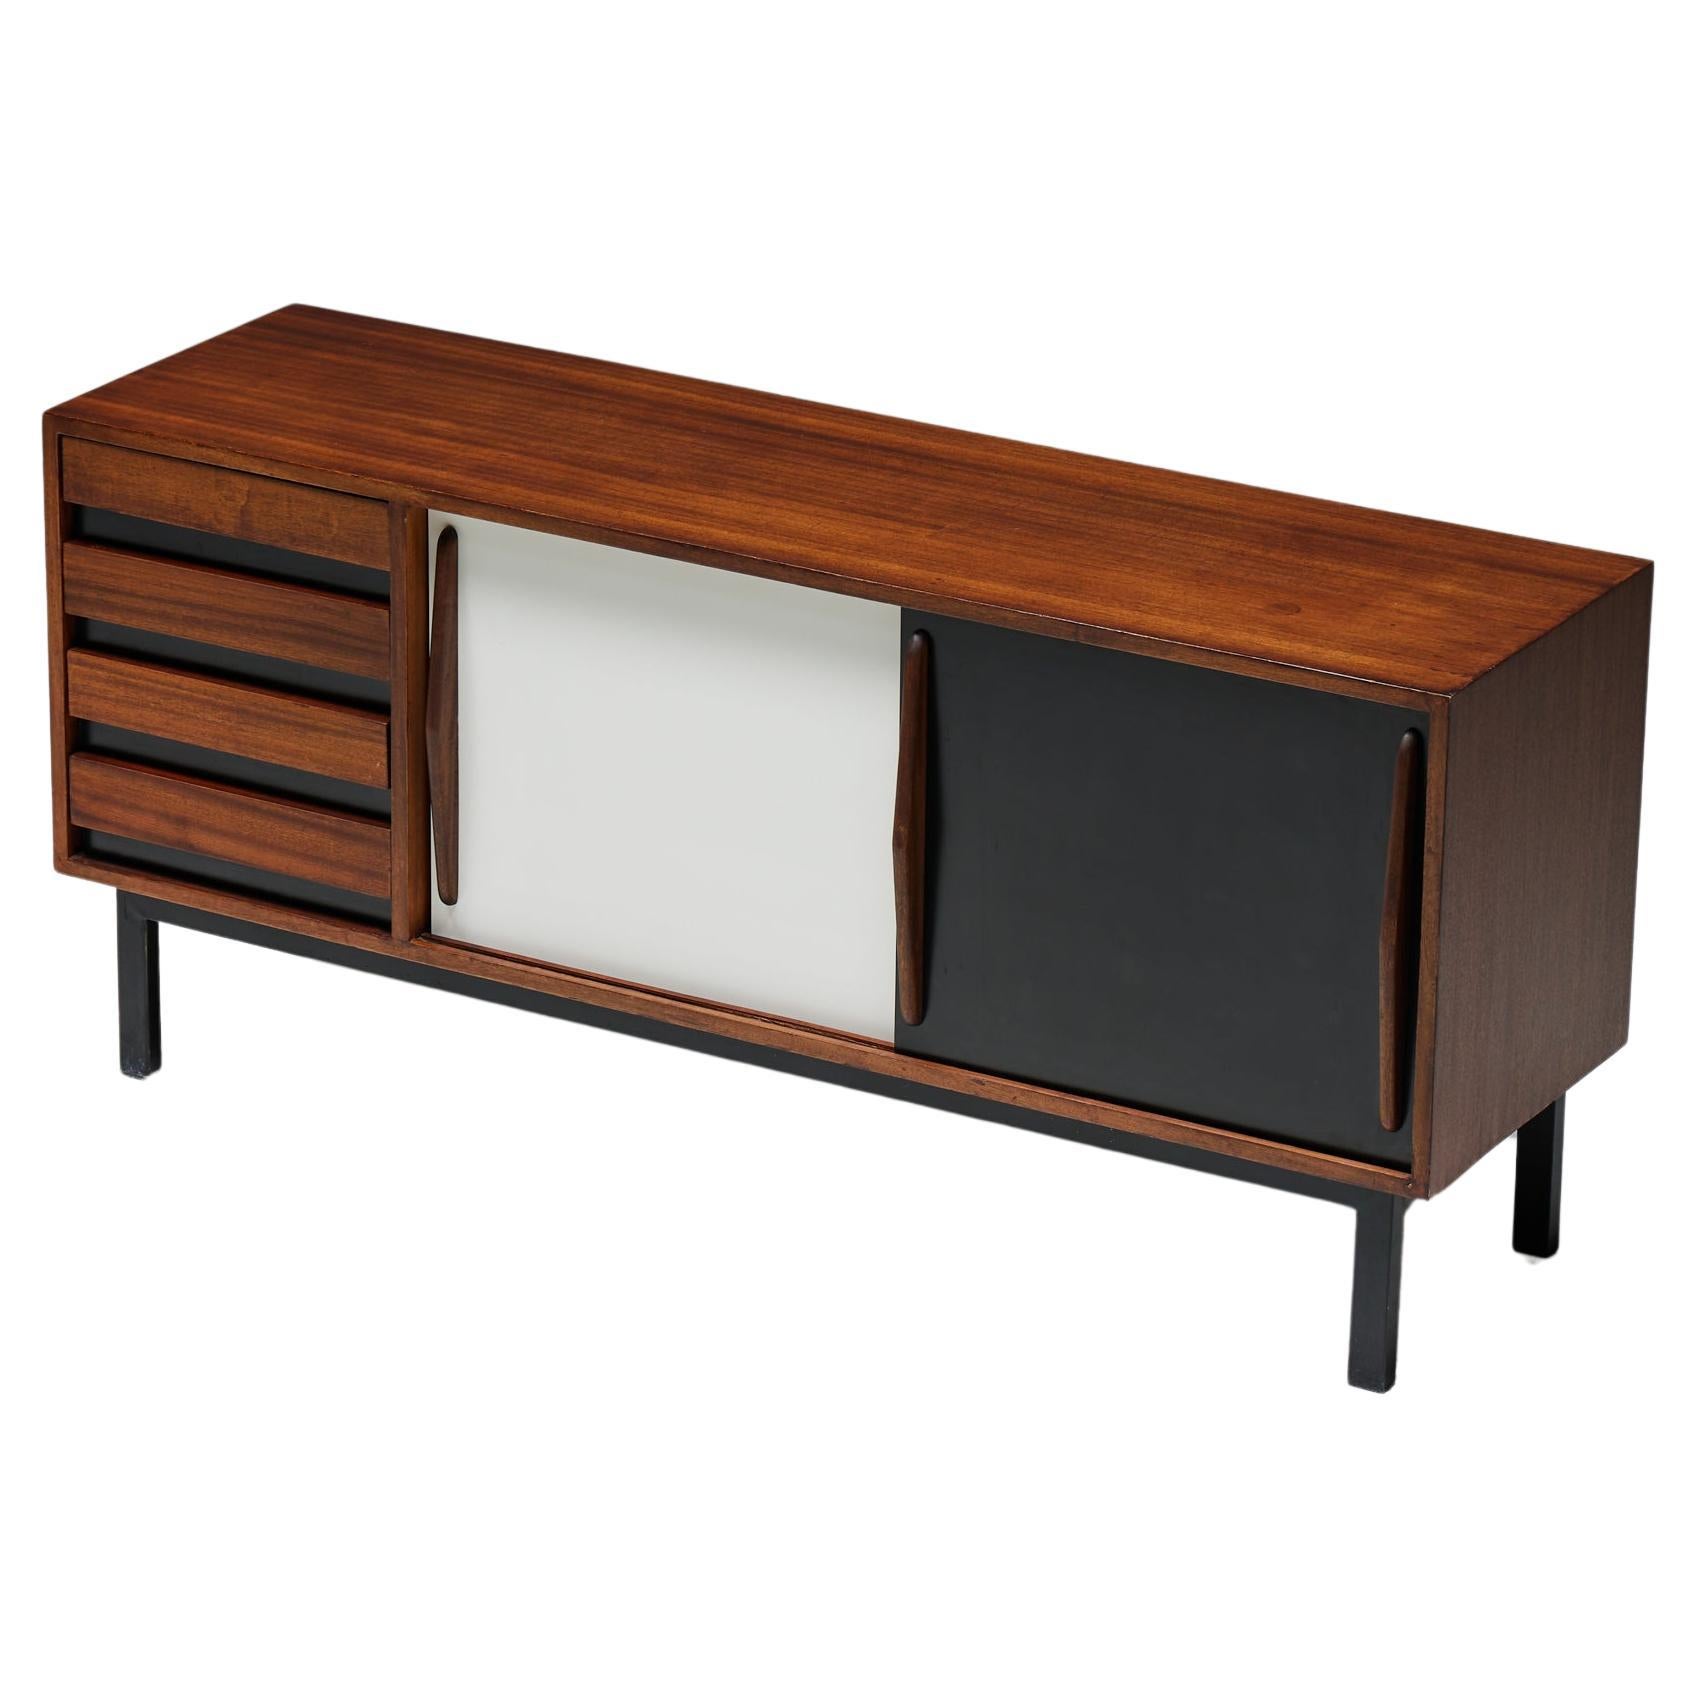 'Cansado' Sideboard by Charlotte Perriand for Steph Simon, France, 1950s